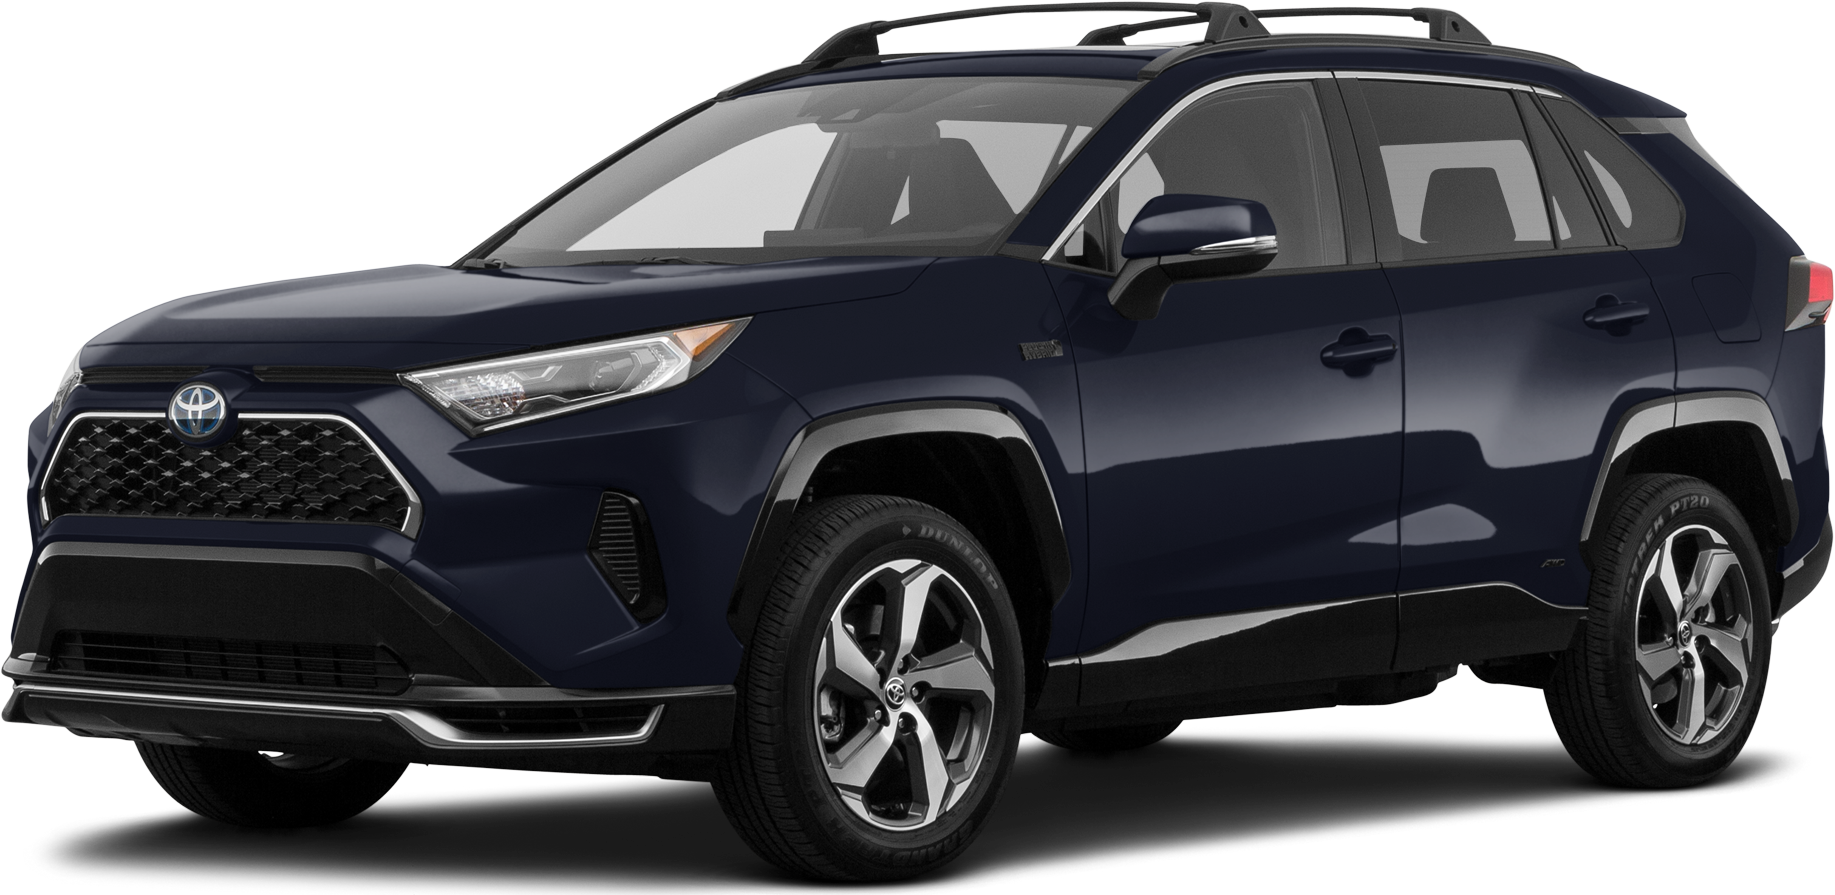 SUV Review: 2022 Toyota RAV4 Limited